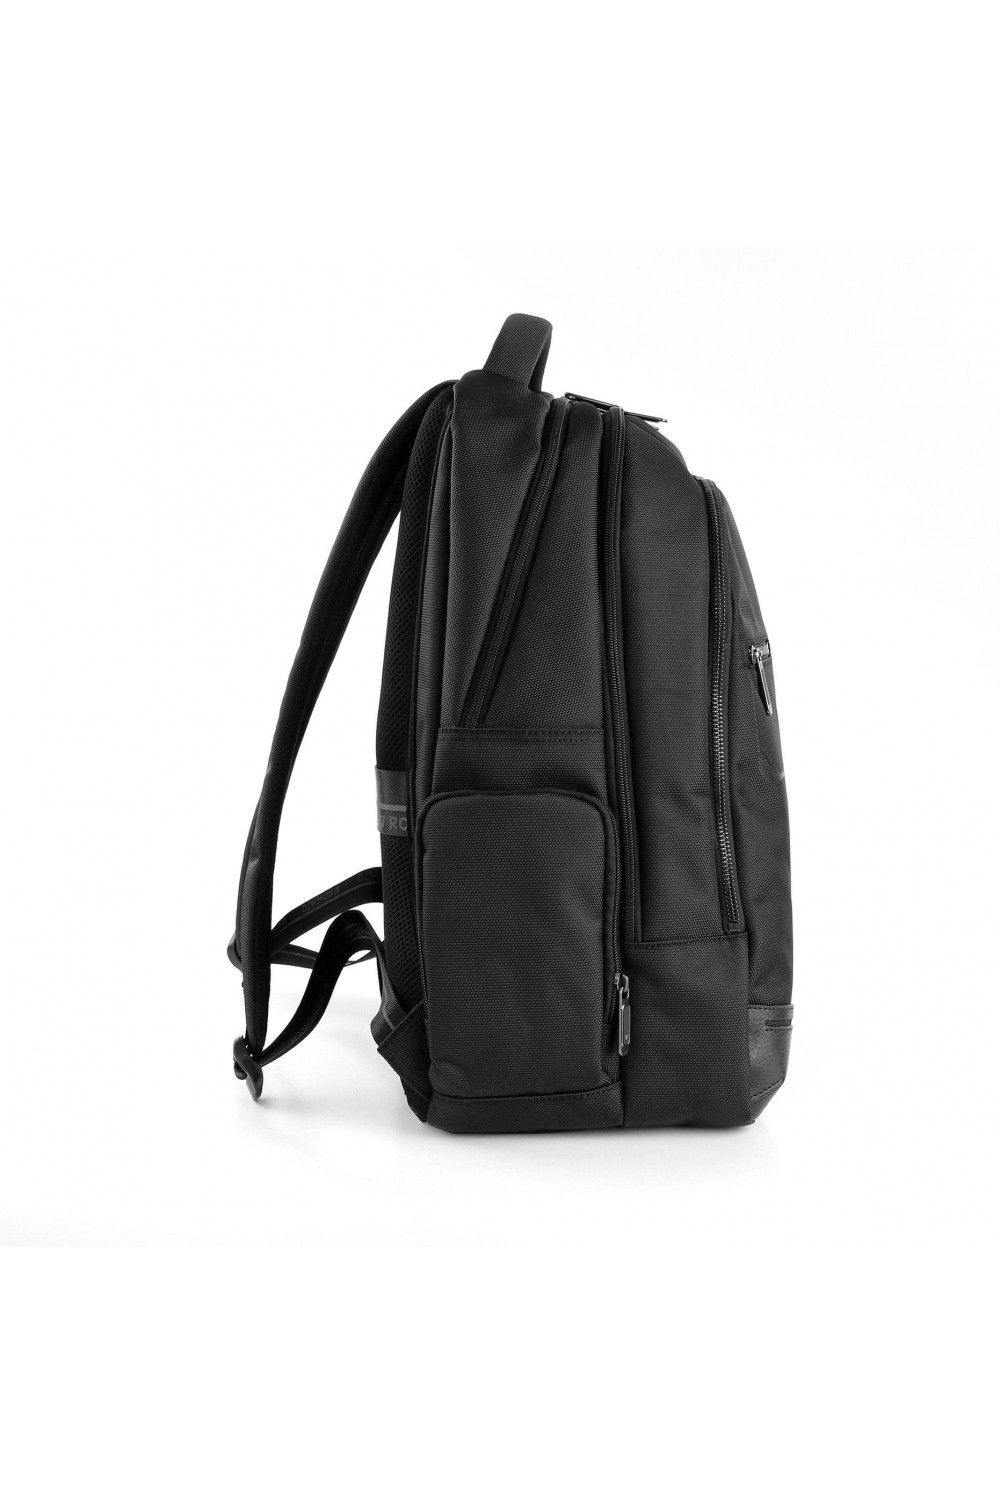 Roncato laptop backpack Wall Street 15.6 inches